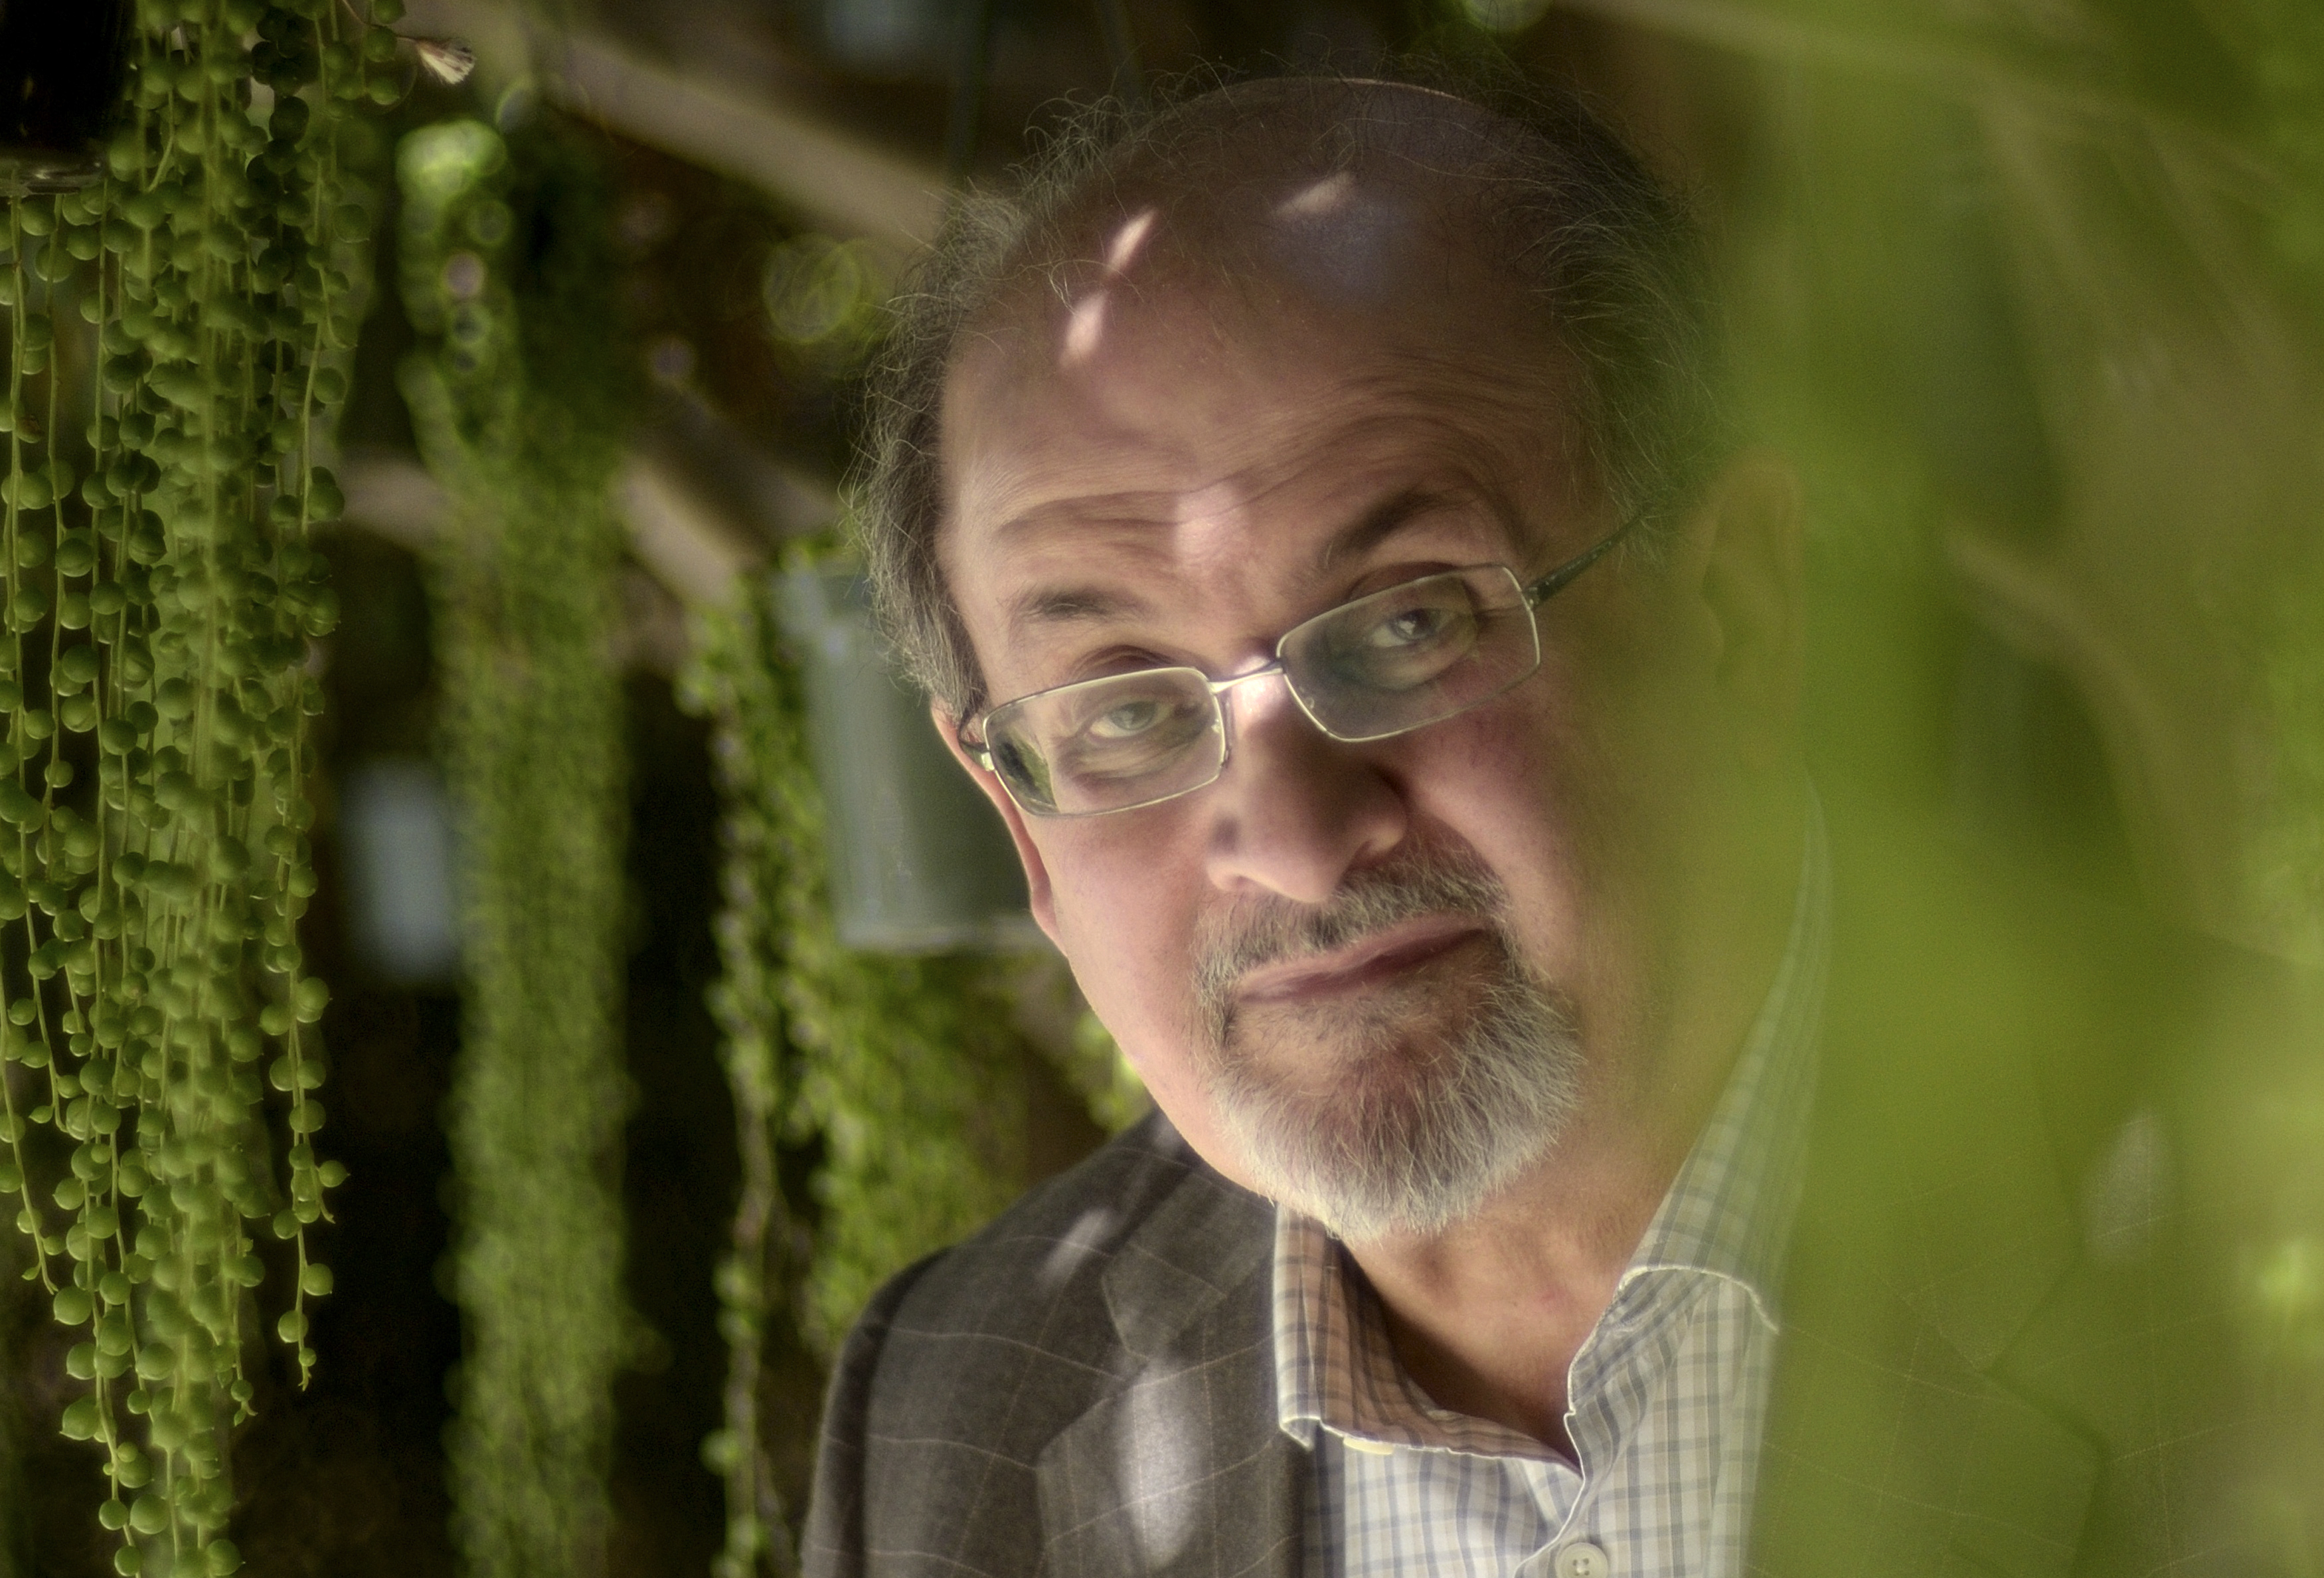 The author Salman Rushdie, who still lives under a fatwa calling for his murder. Photo: AFP